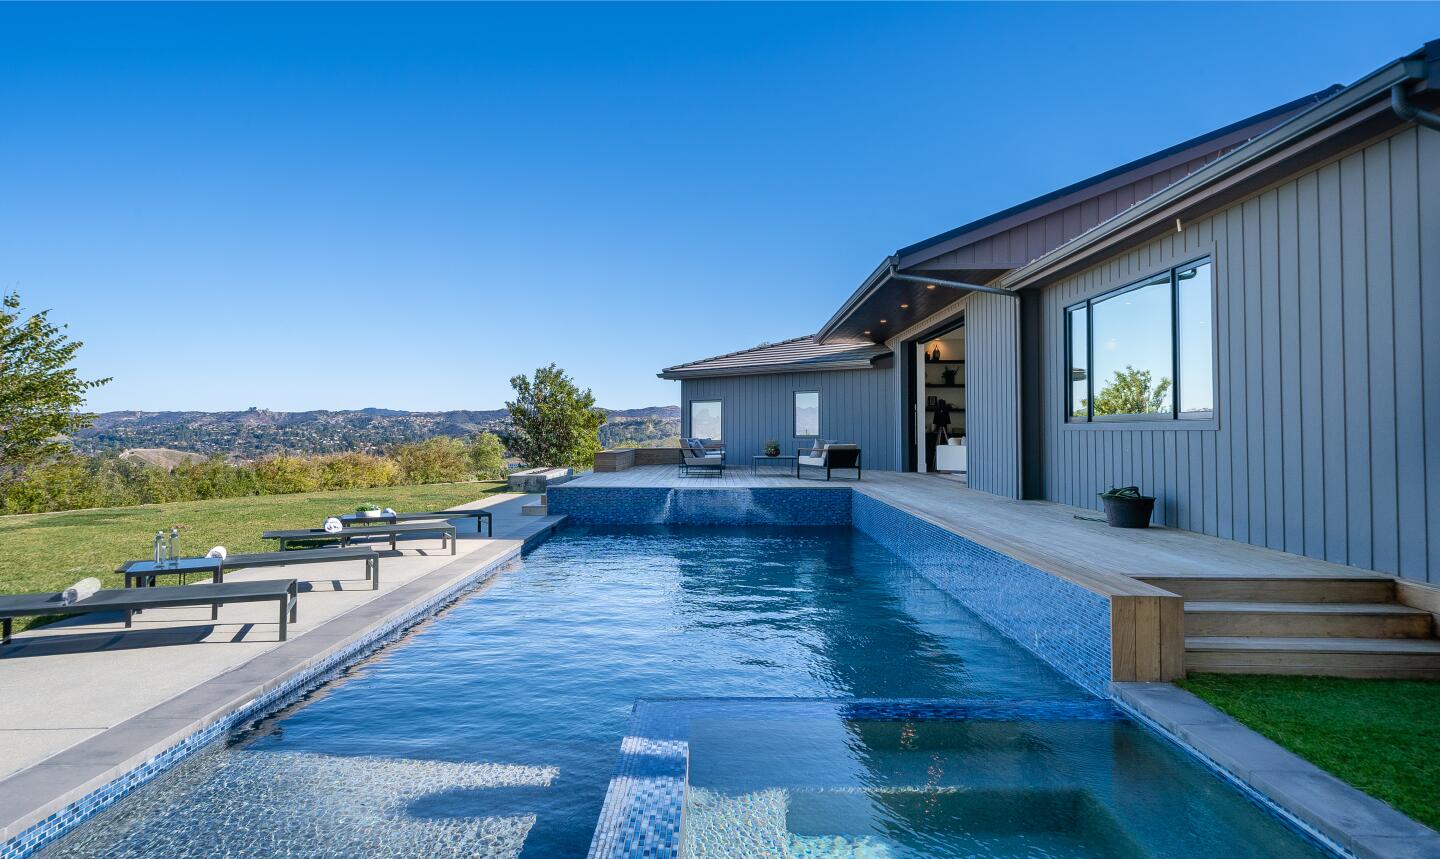 The single-story home sits on 2.3 acres with sweeping city and mountain views.